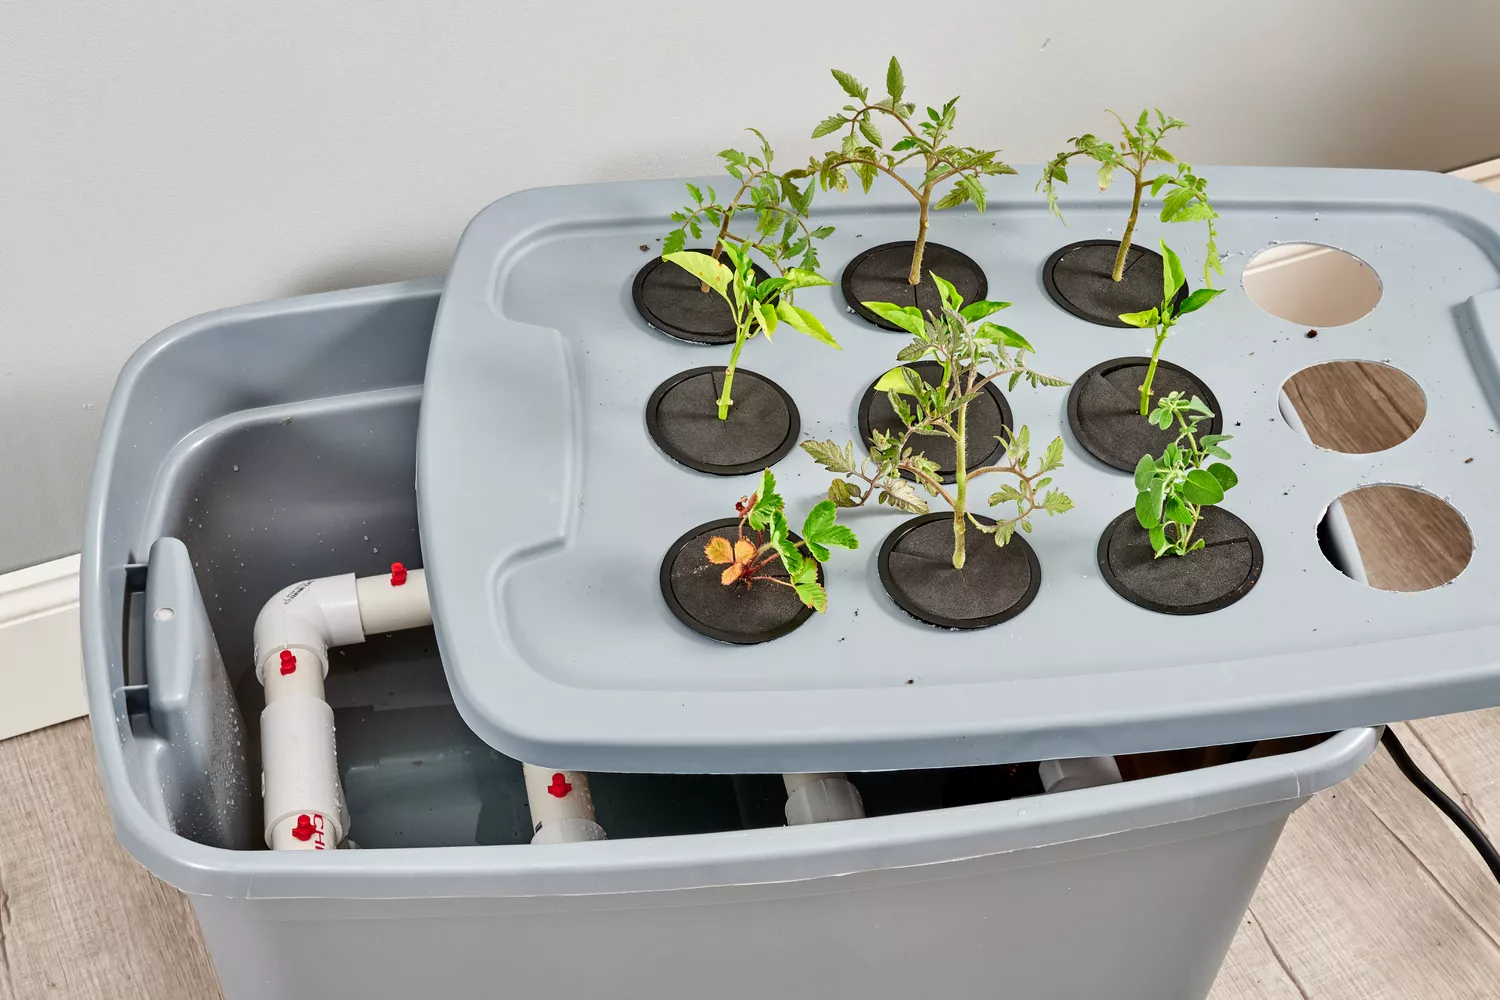 Ensuring Proper Ventilation and Air Circulation in Your Indoor Hydroponic Setup